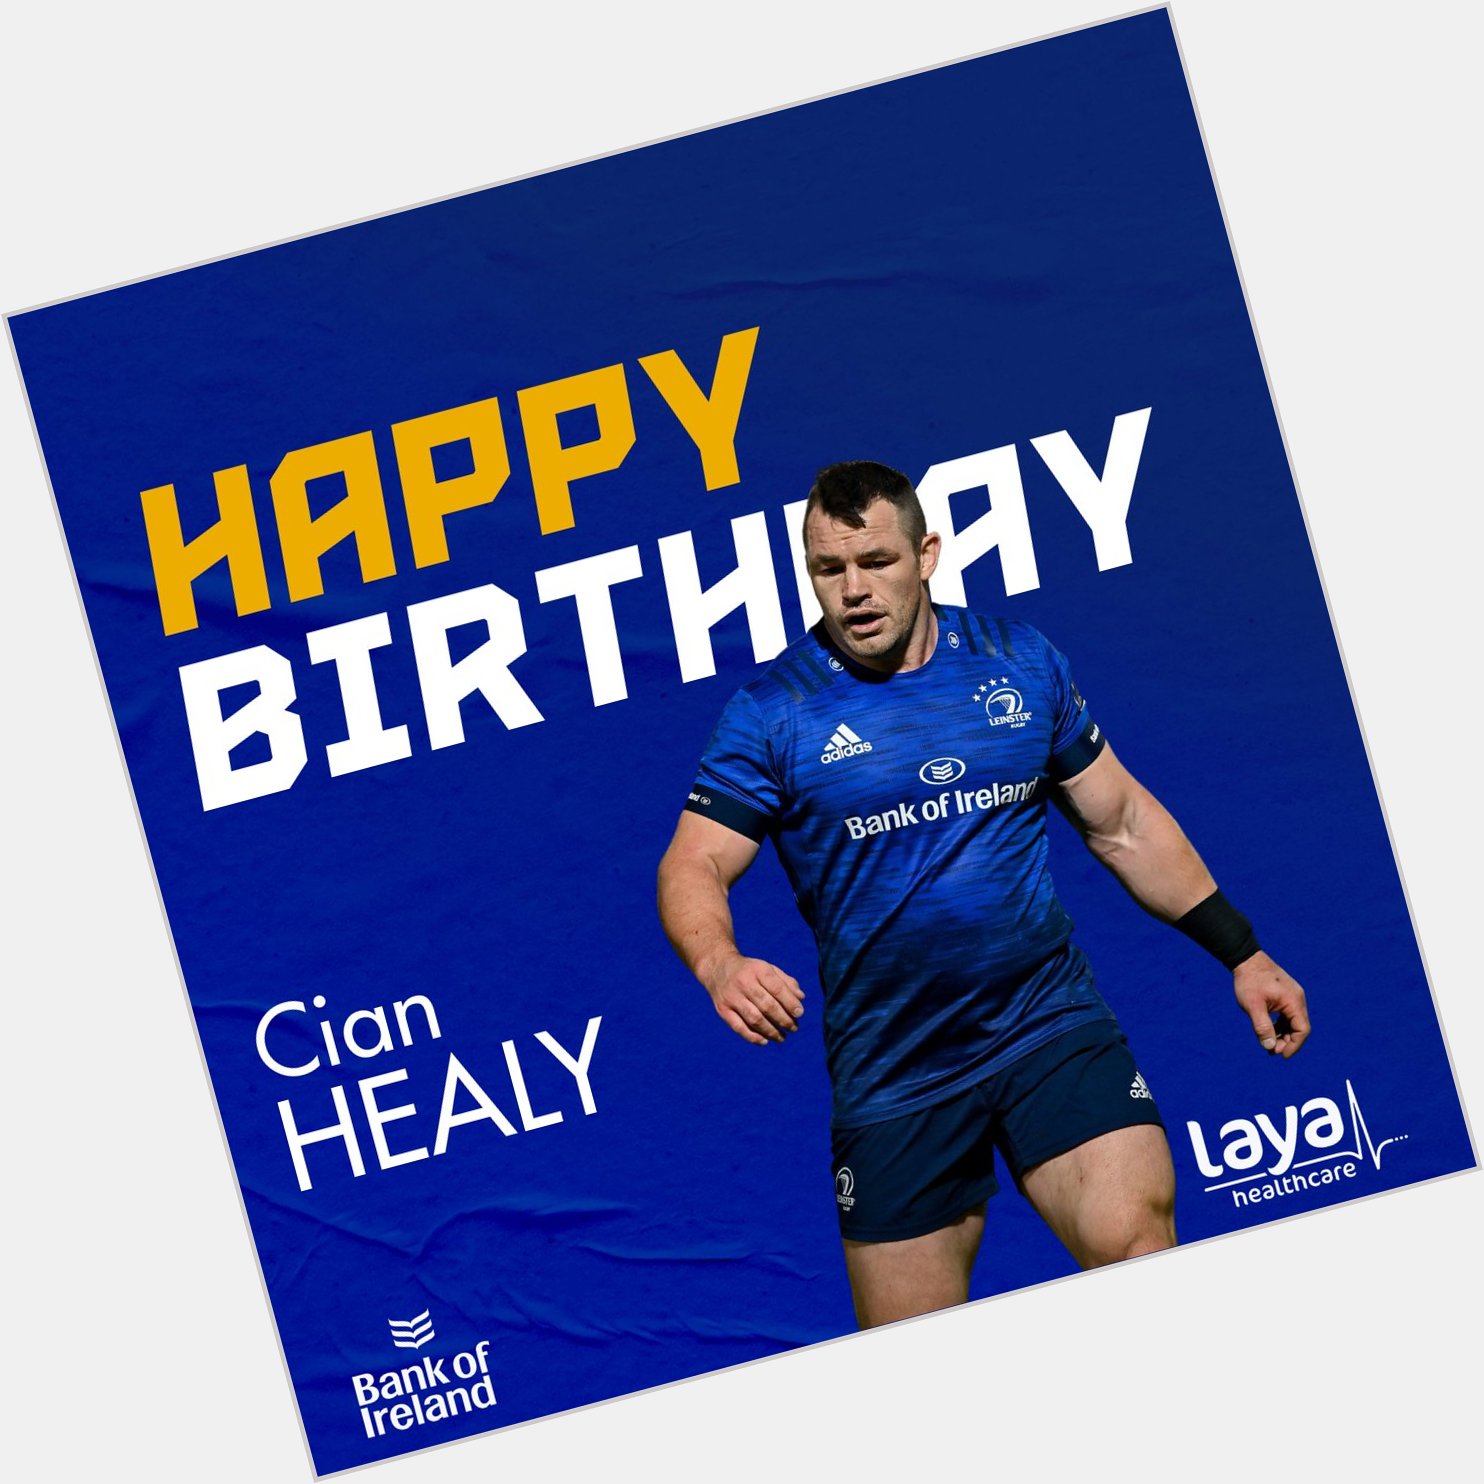  | Remessage or \like\ to join us in wishing a happy birthday to Cian Healy!  